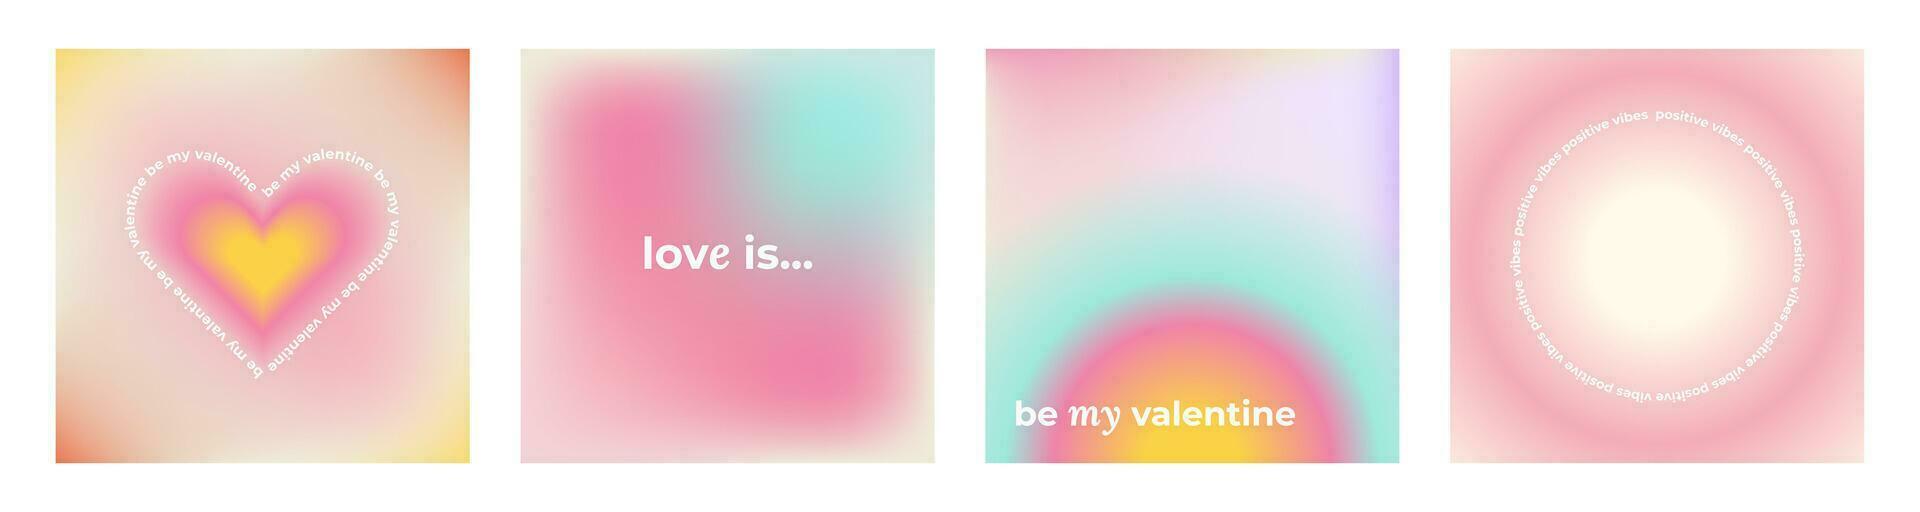 Set of Y2k Trendy Aesthetic abstract gradient pink violet background with translucent aura irregular shapes blurred pattern. Social media valentines day poster, stories highlight templates vector